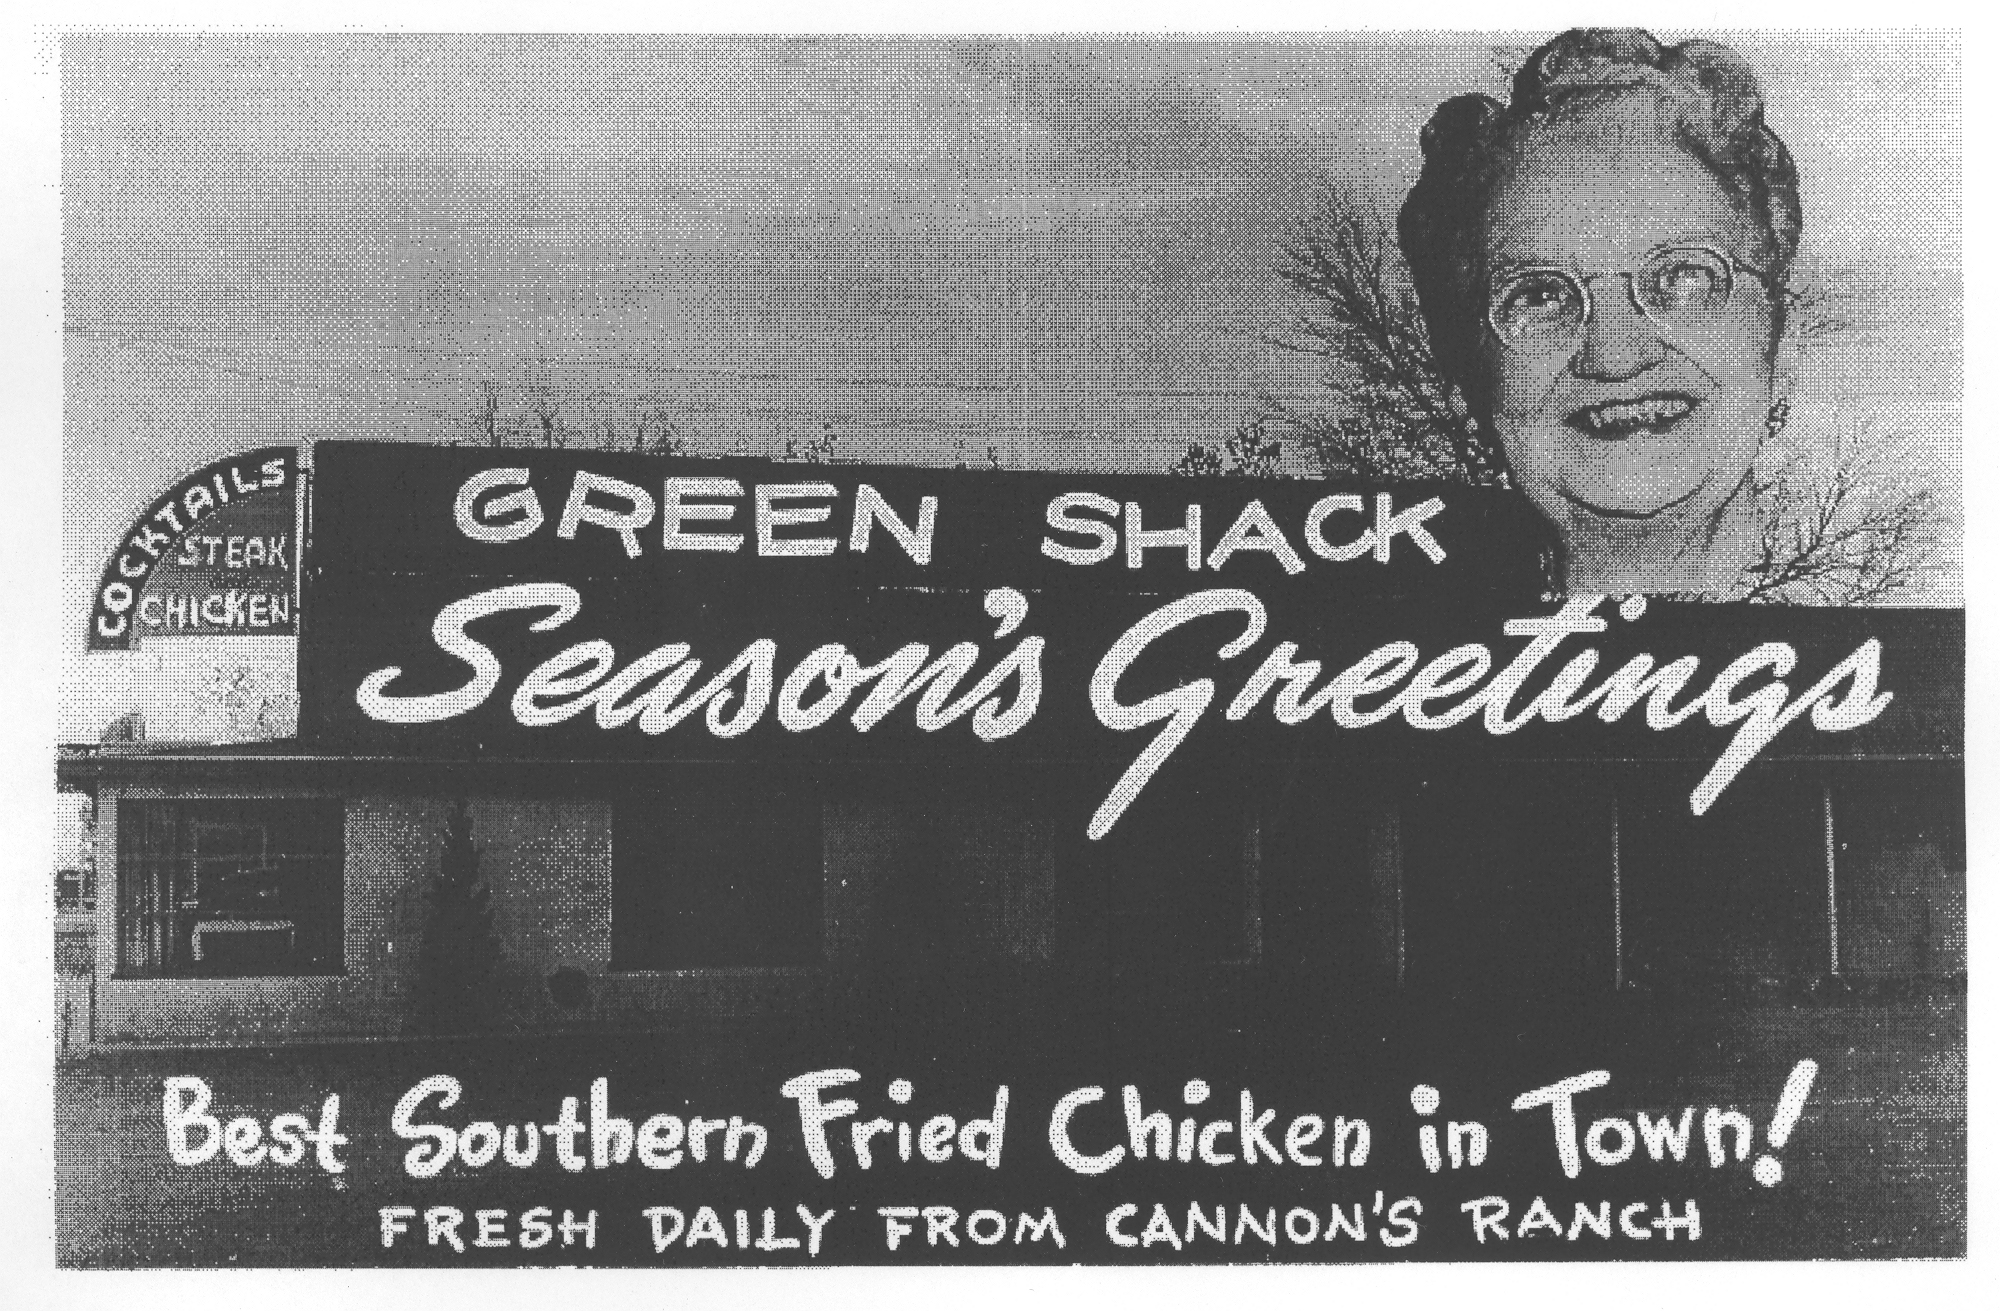 Season's Greetings from the Green Shack